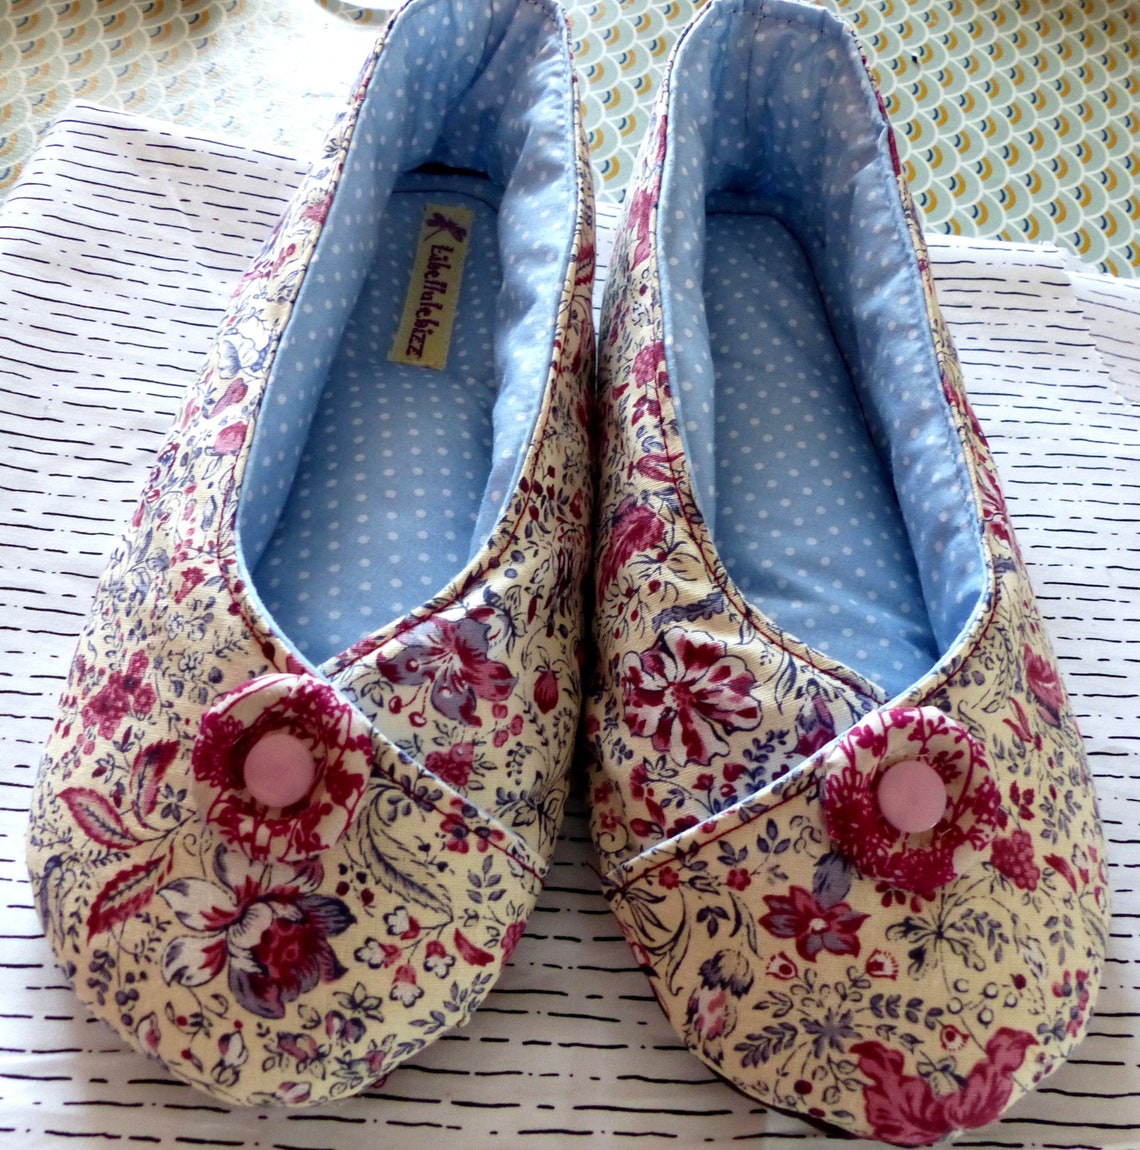 Women's kimono slippers old-fashioned old | Etsy